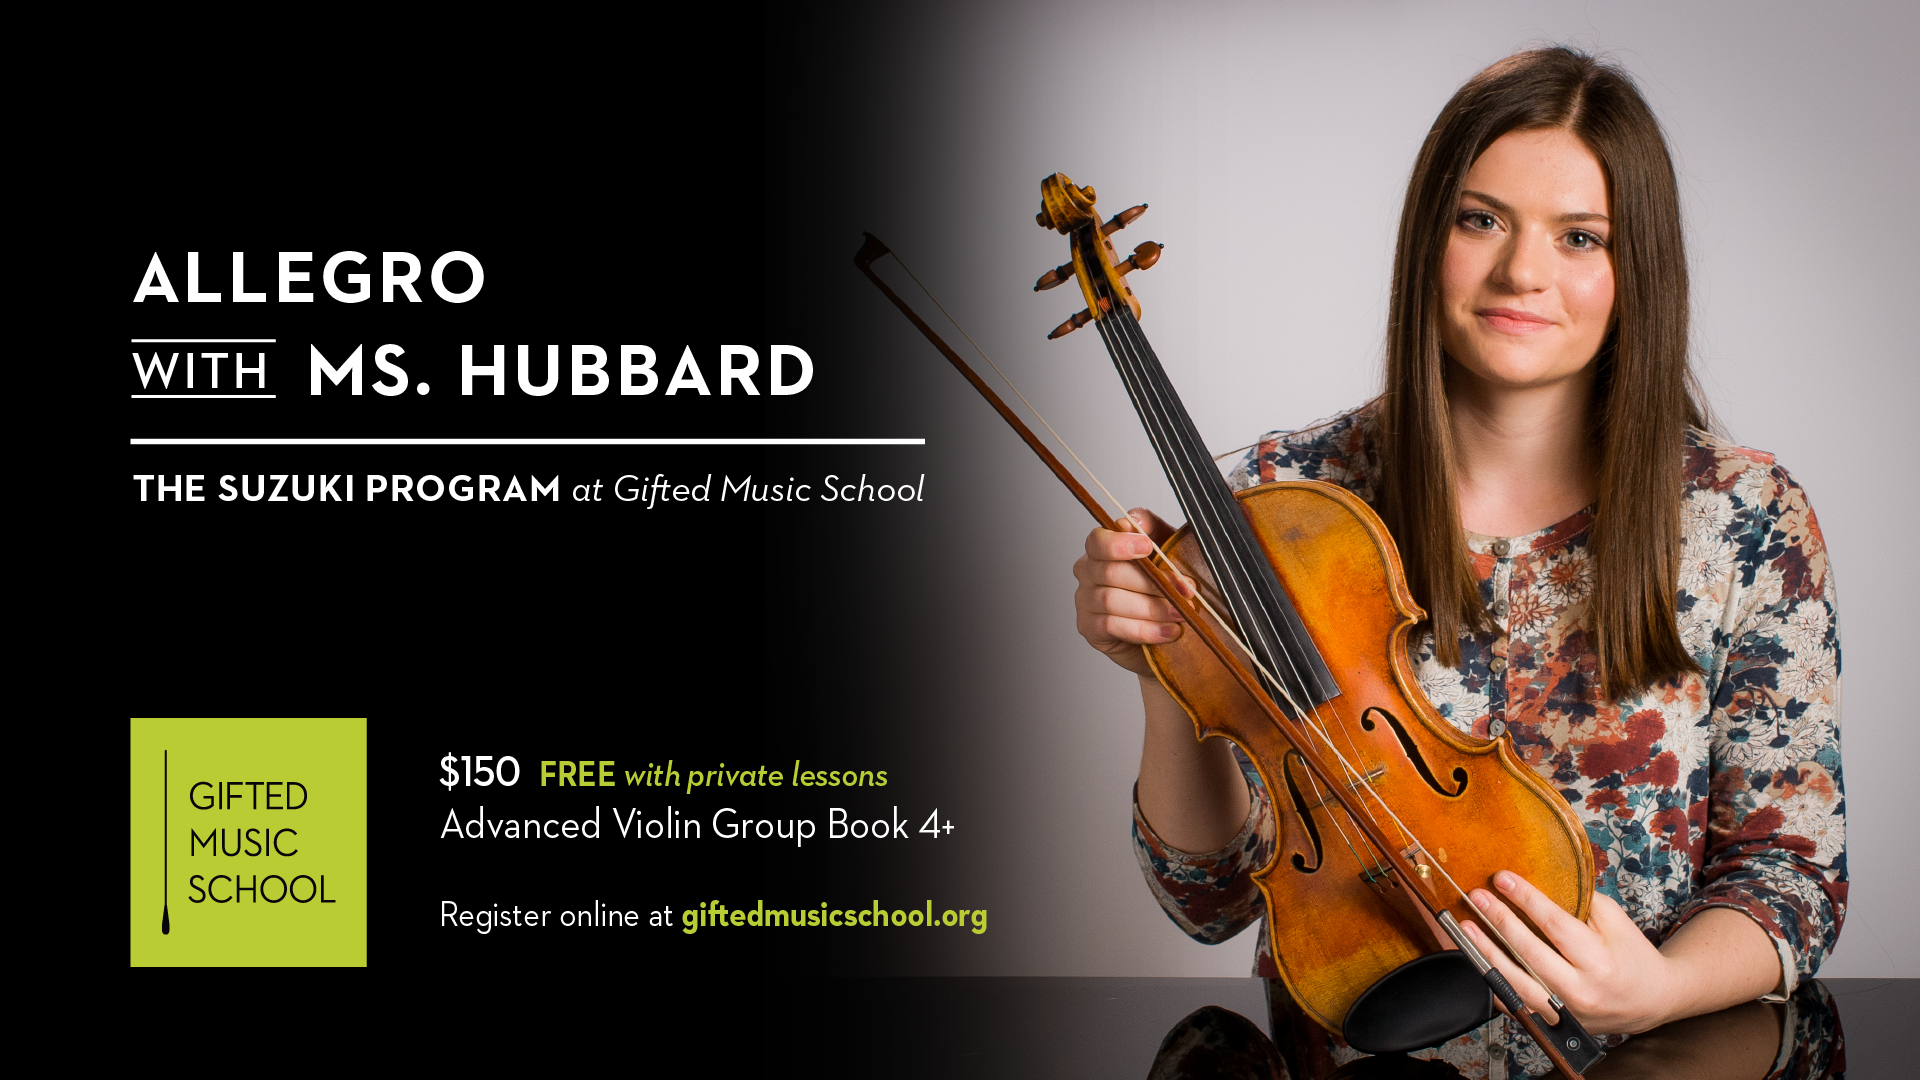 Gifted Music School Allegro Violin Group Class Advertisement with Erika Hubbard holding Violin